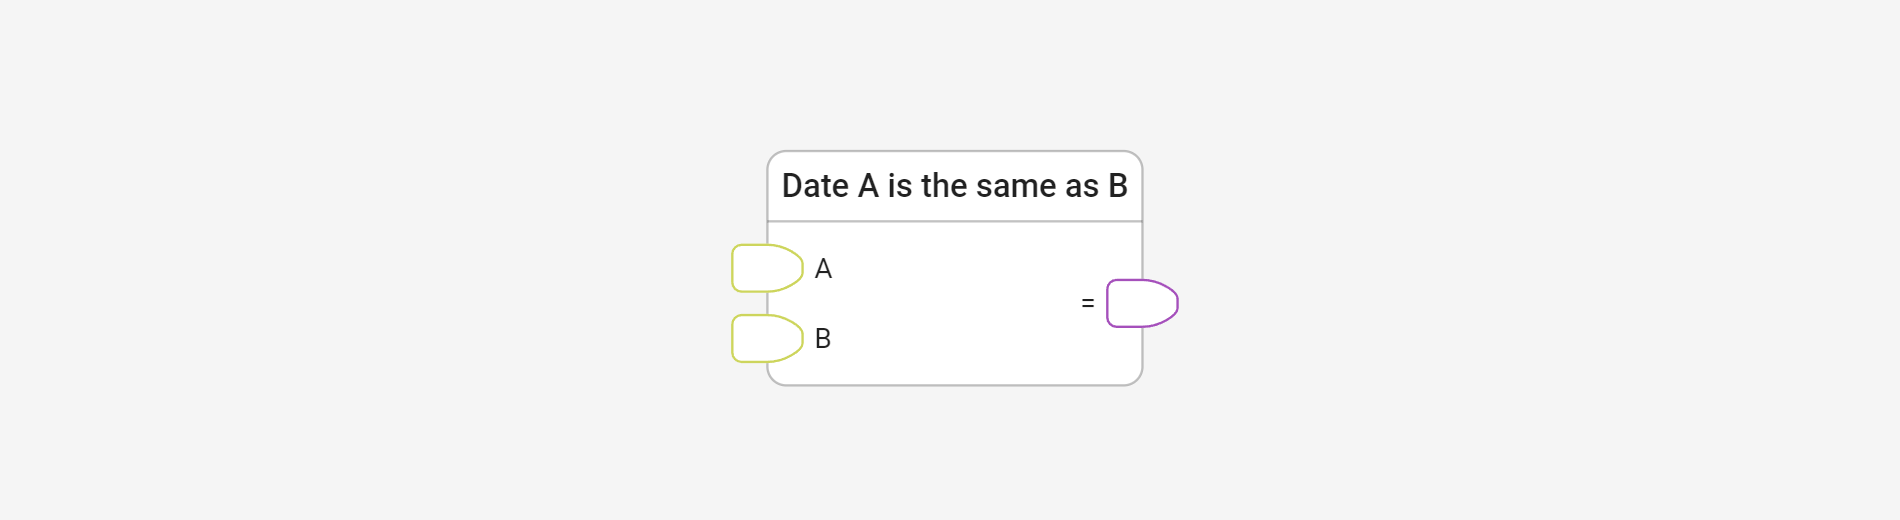 Check date using Date A is the same as B